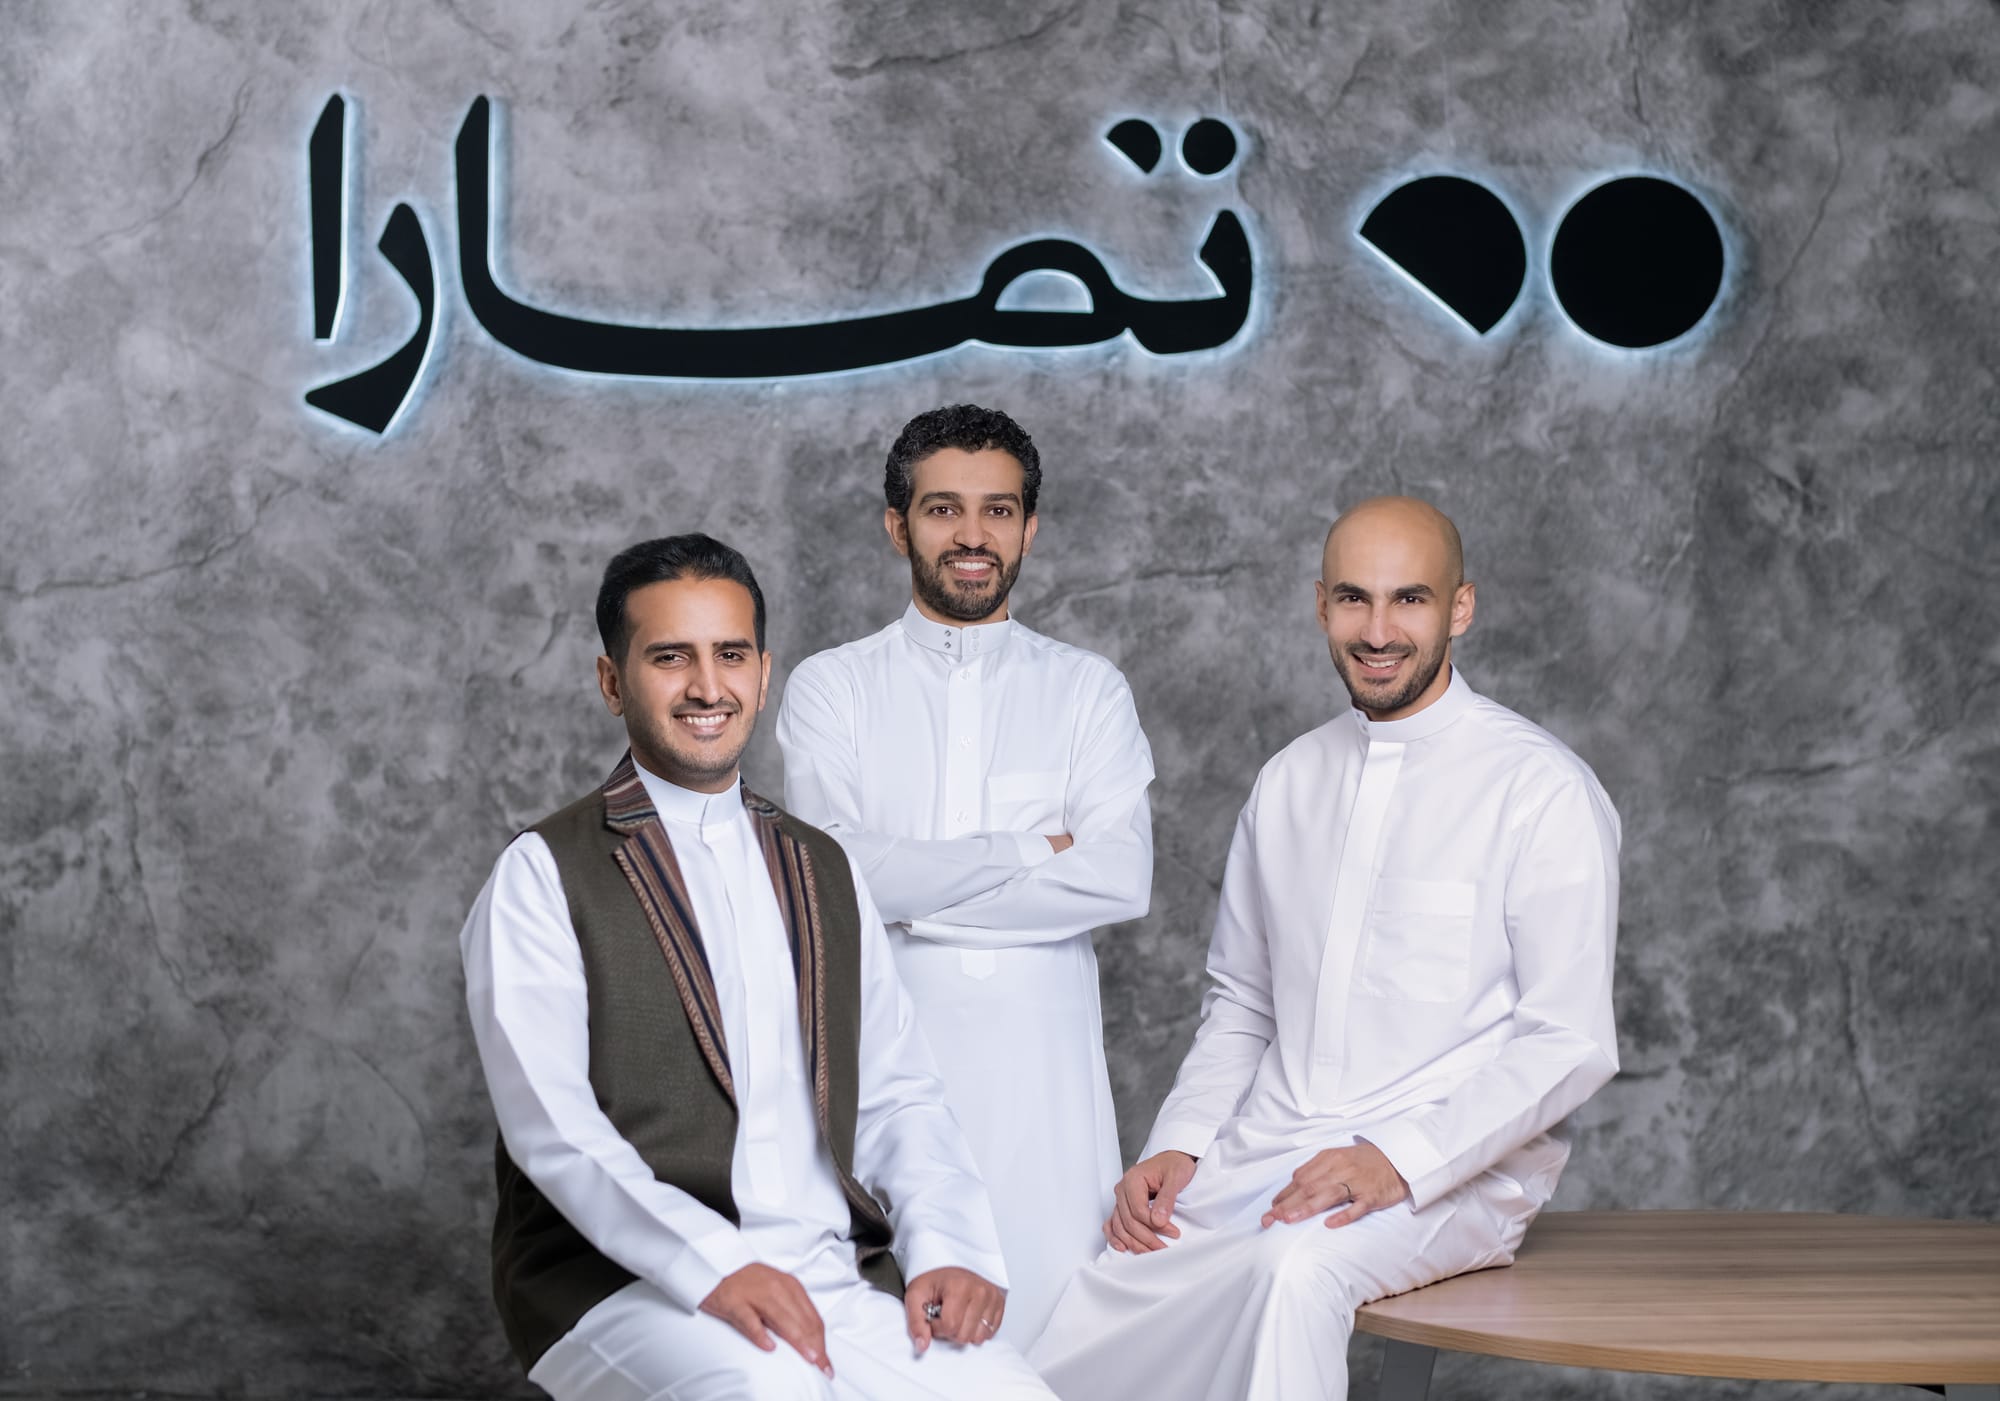 KSA-Based Startup Tamara Becomes The Newest Fintech Unicorn in the Kingdom With Its US$1 Billion Valuation